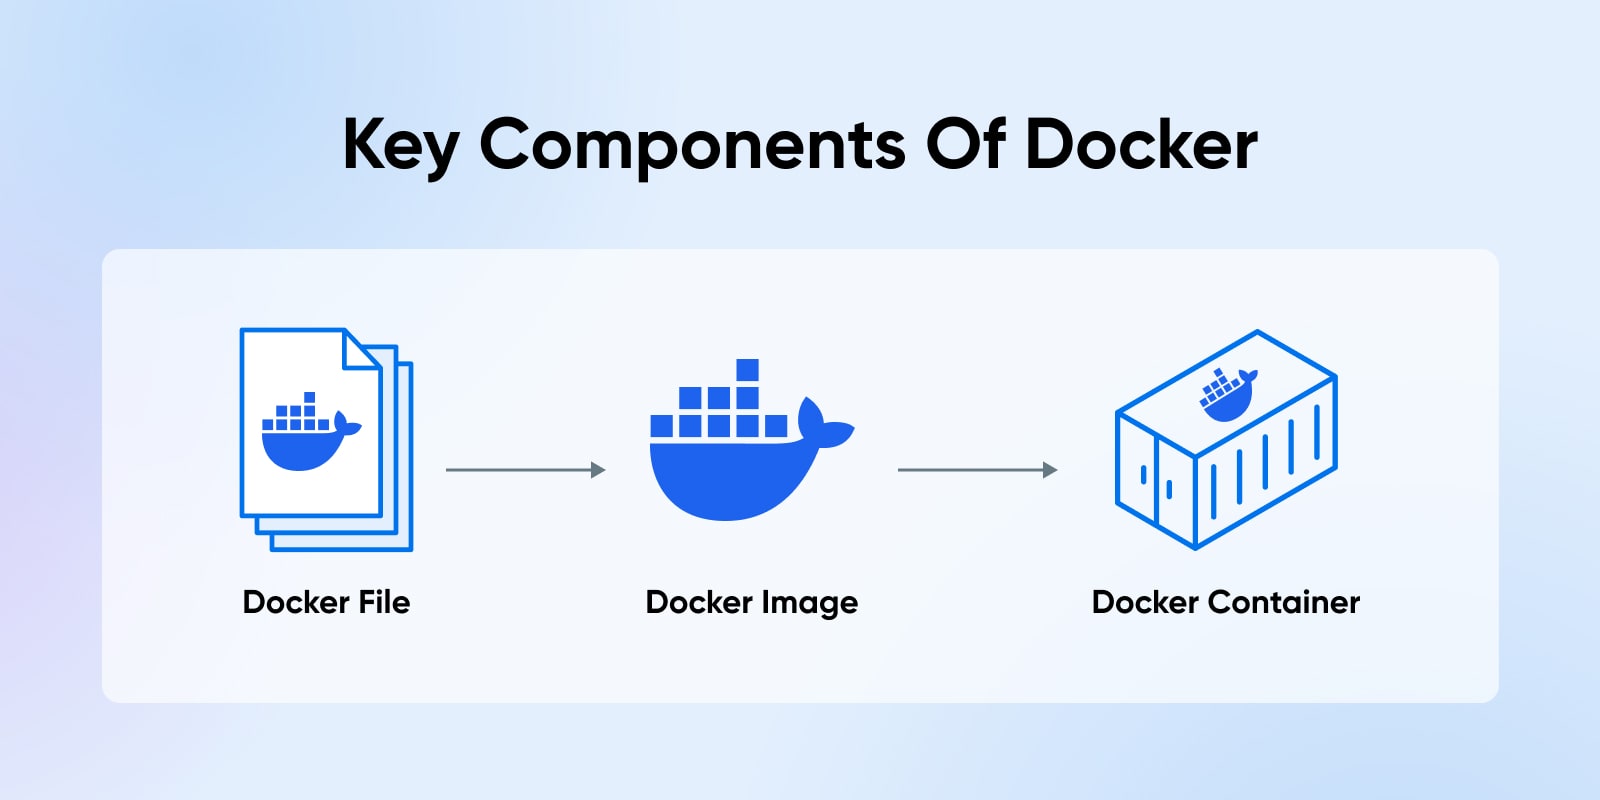 "Key Components Of Docker" diagram featuring a Docker file, Docker image, and Docker container.